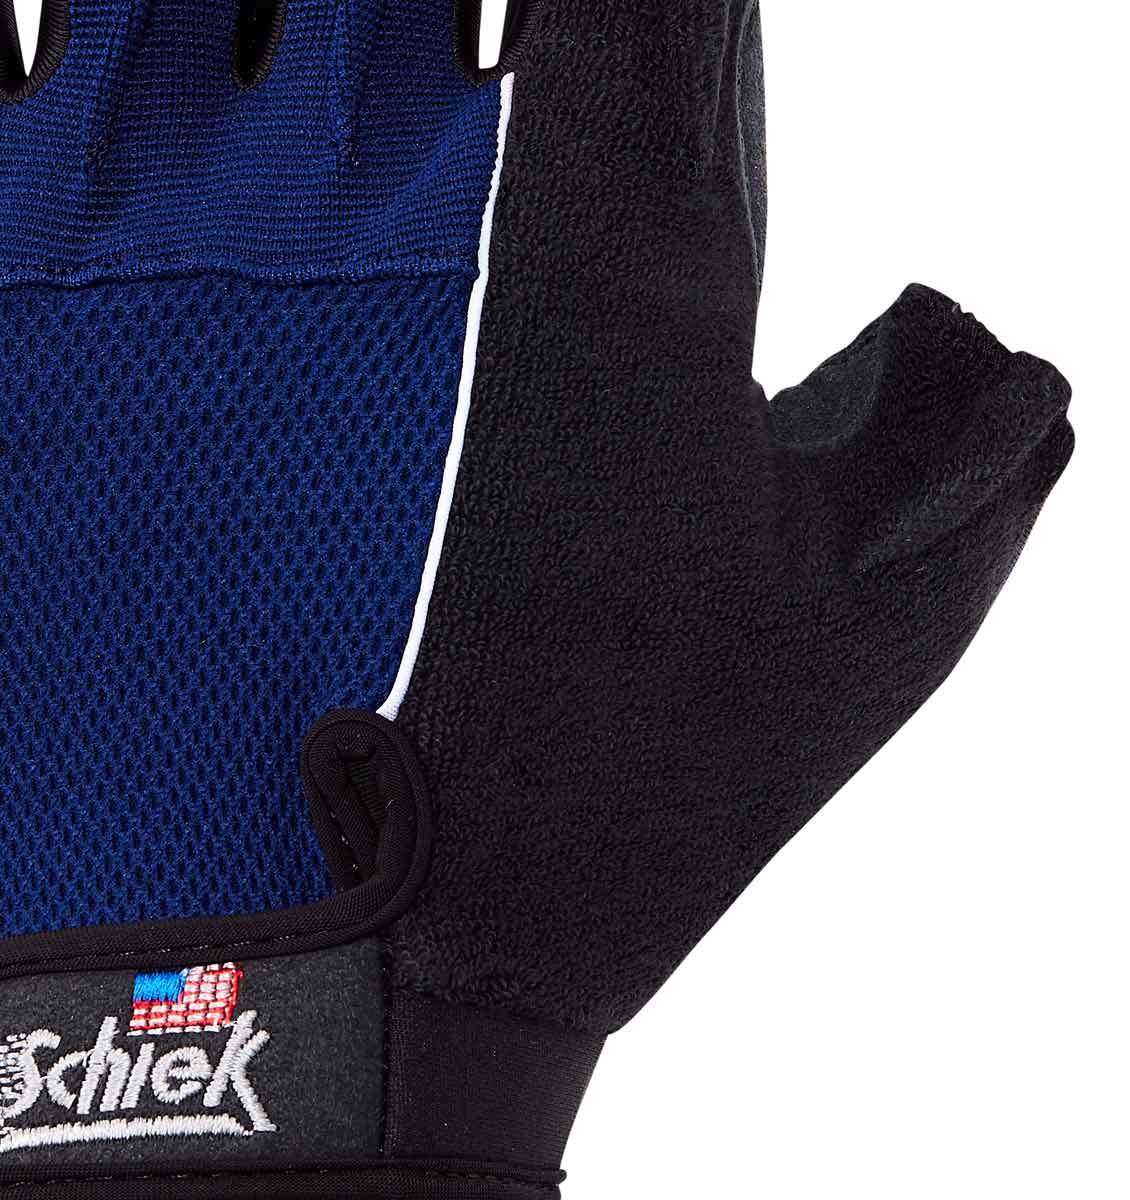 510 Schiek Cross Training and Fitness Gloves Top Close Up